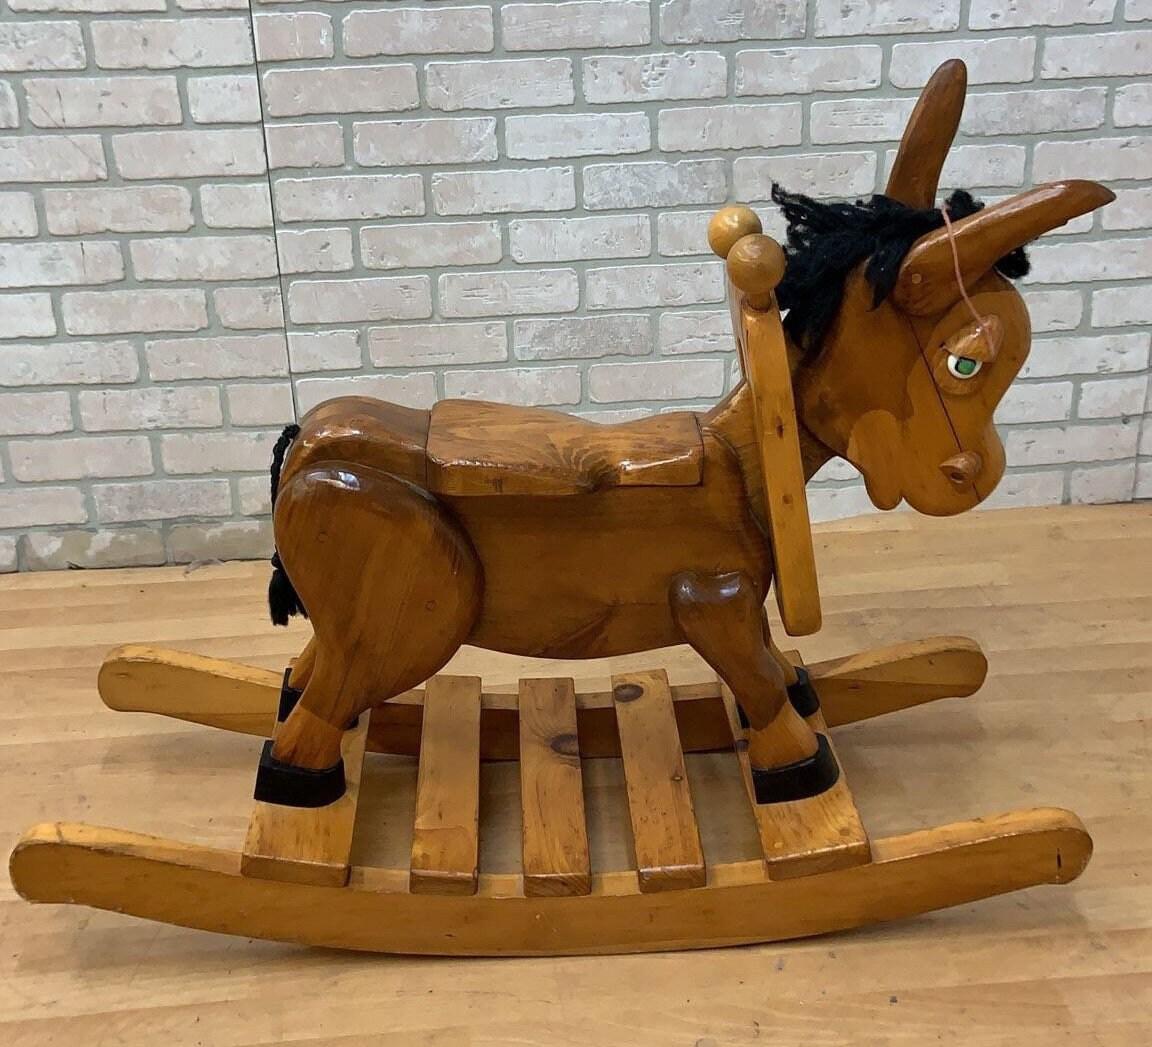 Vintage Hand Made Wood Carved Rocking Donkey

Rare, unique, and absolutely adorable hand made, solid wood carved vintage rocking donkey. The perfect classic vintage touch to complete your nursery.

Circa - 20th Century 

Dimensions
H: 30